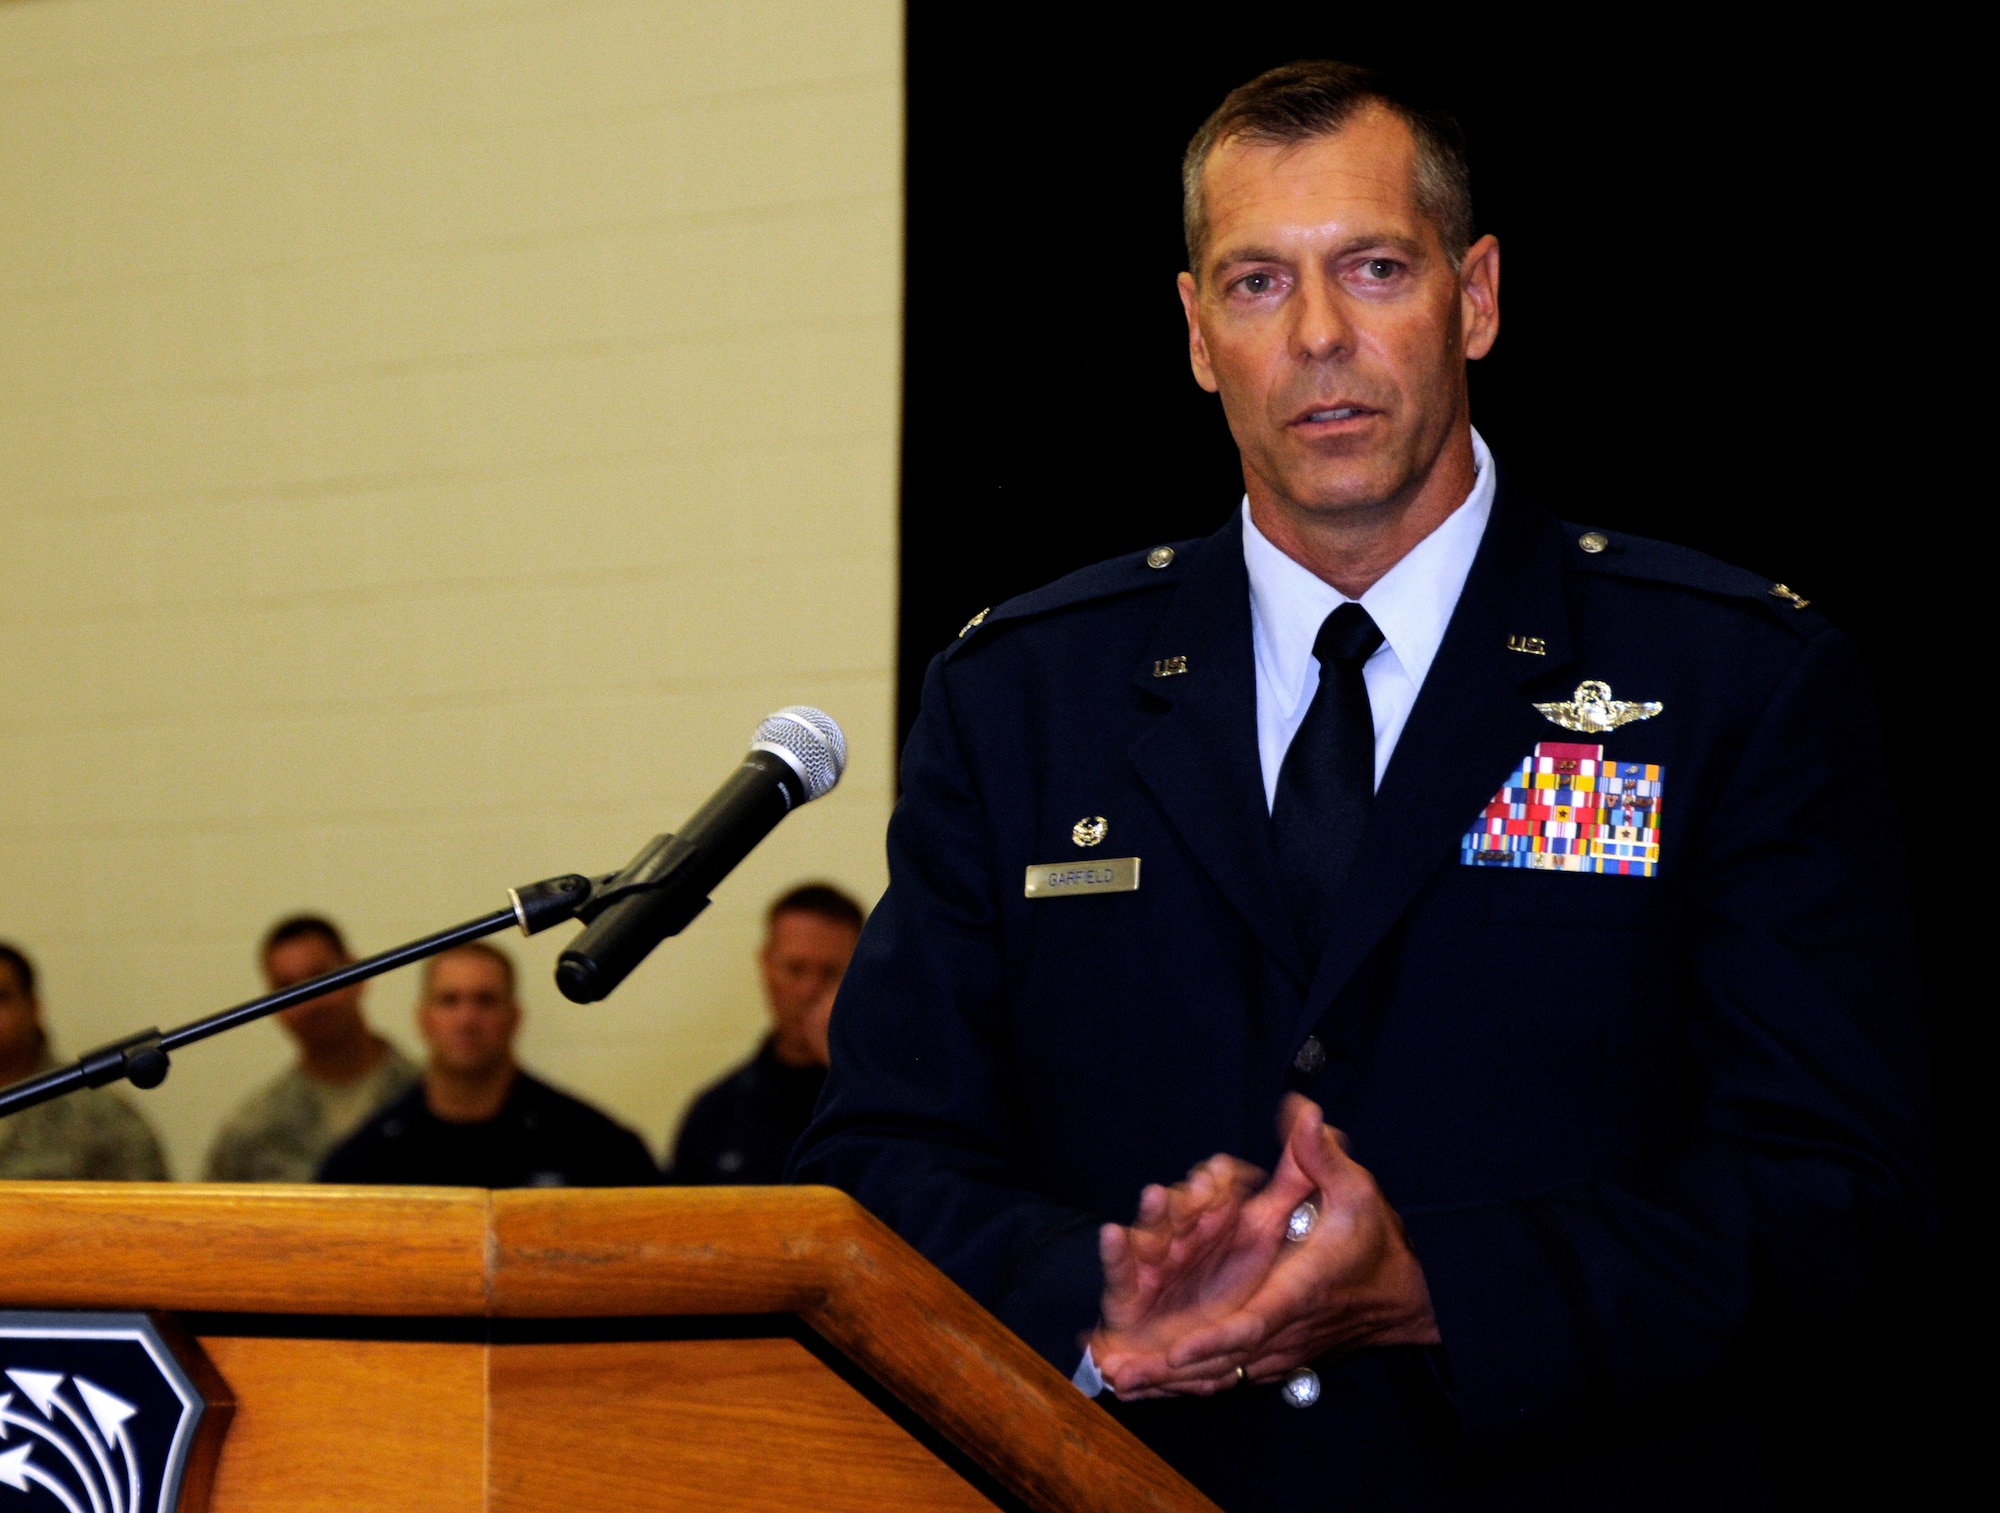 Col. David P. Garfield, the 482nd Fighter Wing commander, addresses members of Team Homestead for the first time as their new commander during a change-of-command ceremony in Building 471, at Homestead Air Reserve Base, Florida, Sept. 13.  (U.S. Air Force photo by Senior Airman Frank Casciotta)